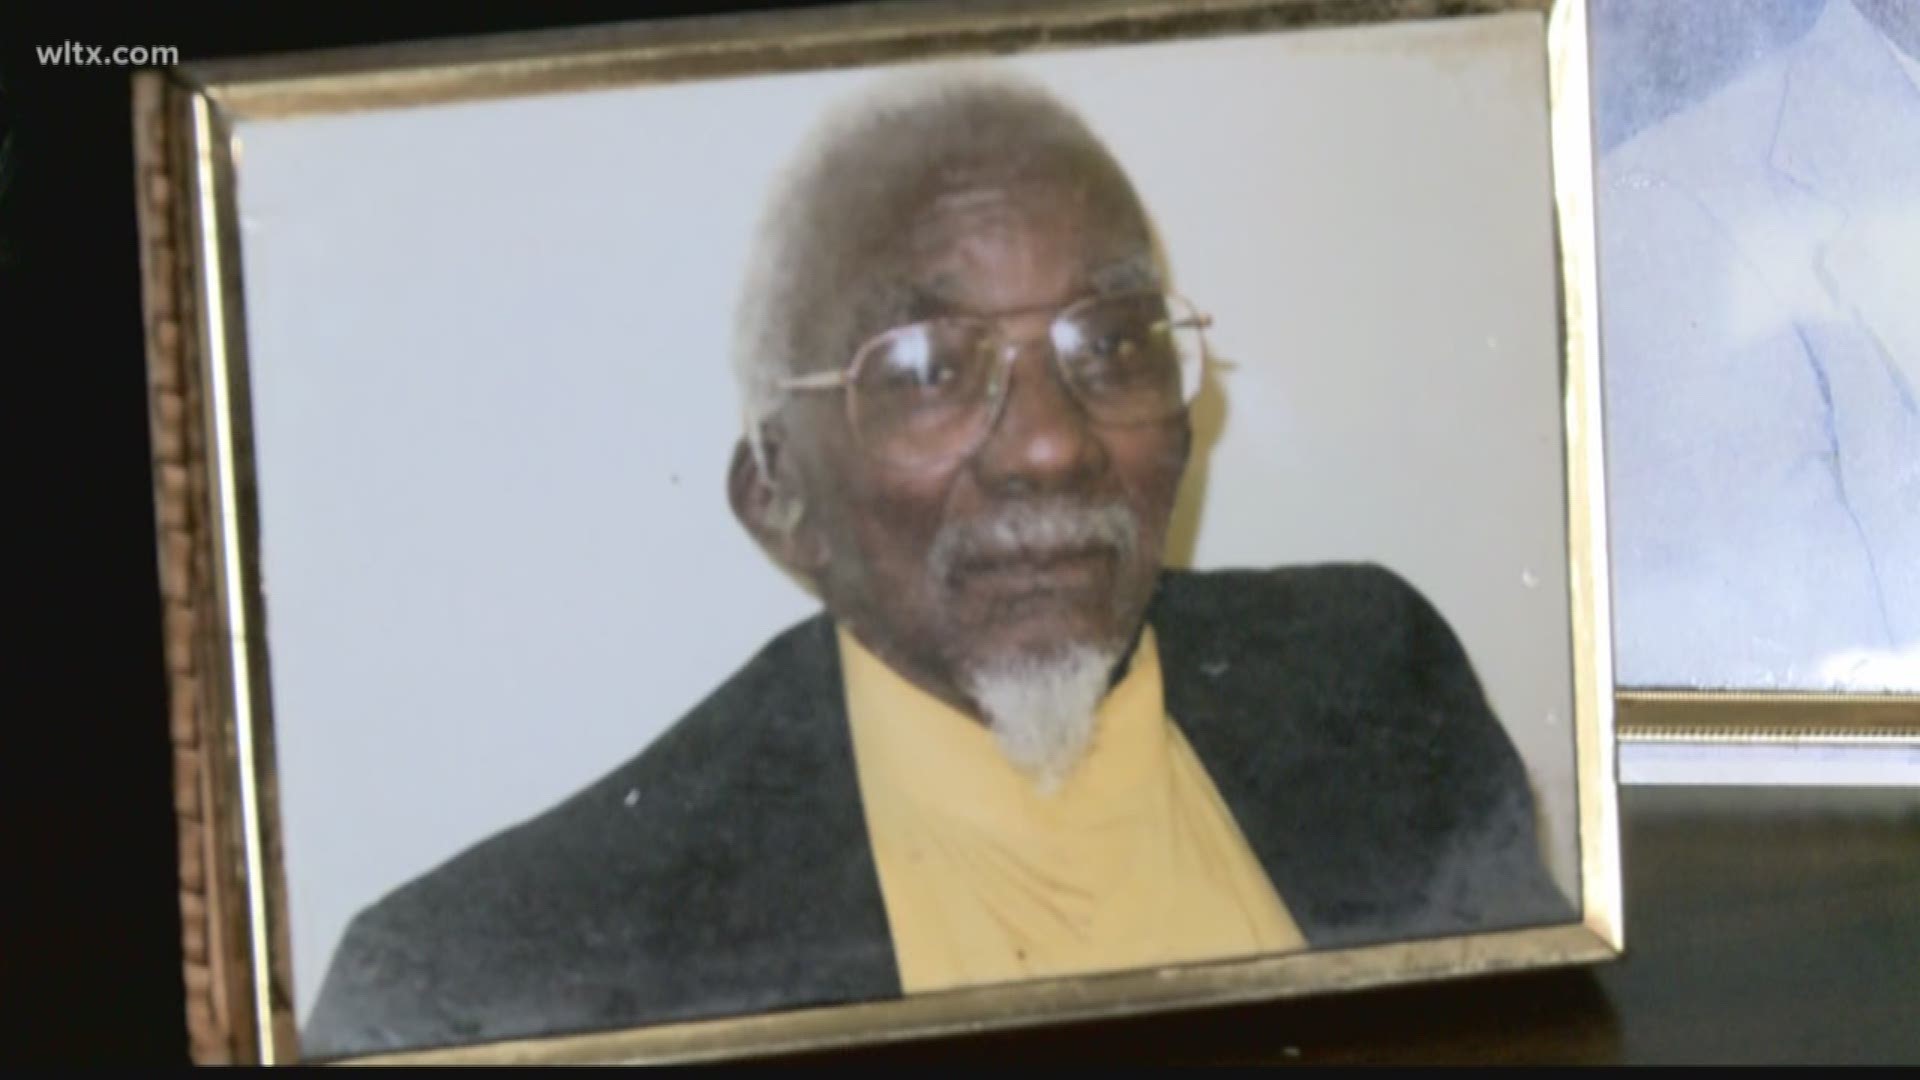 Roscoe Cheeseboro Sr. celebrated his 105th birthday Friday. His family was there to help celebrate the big day.